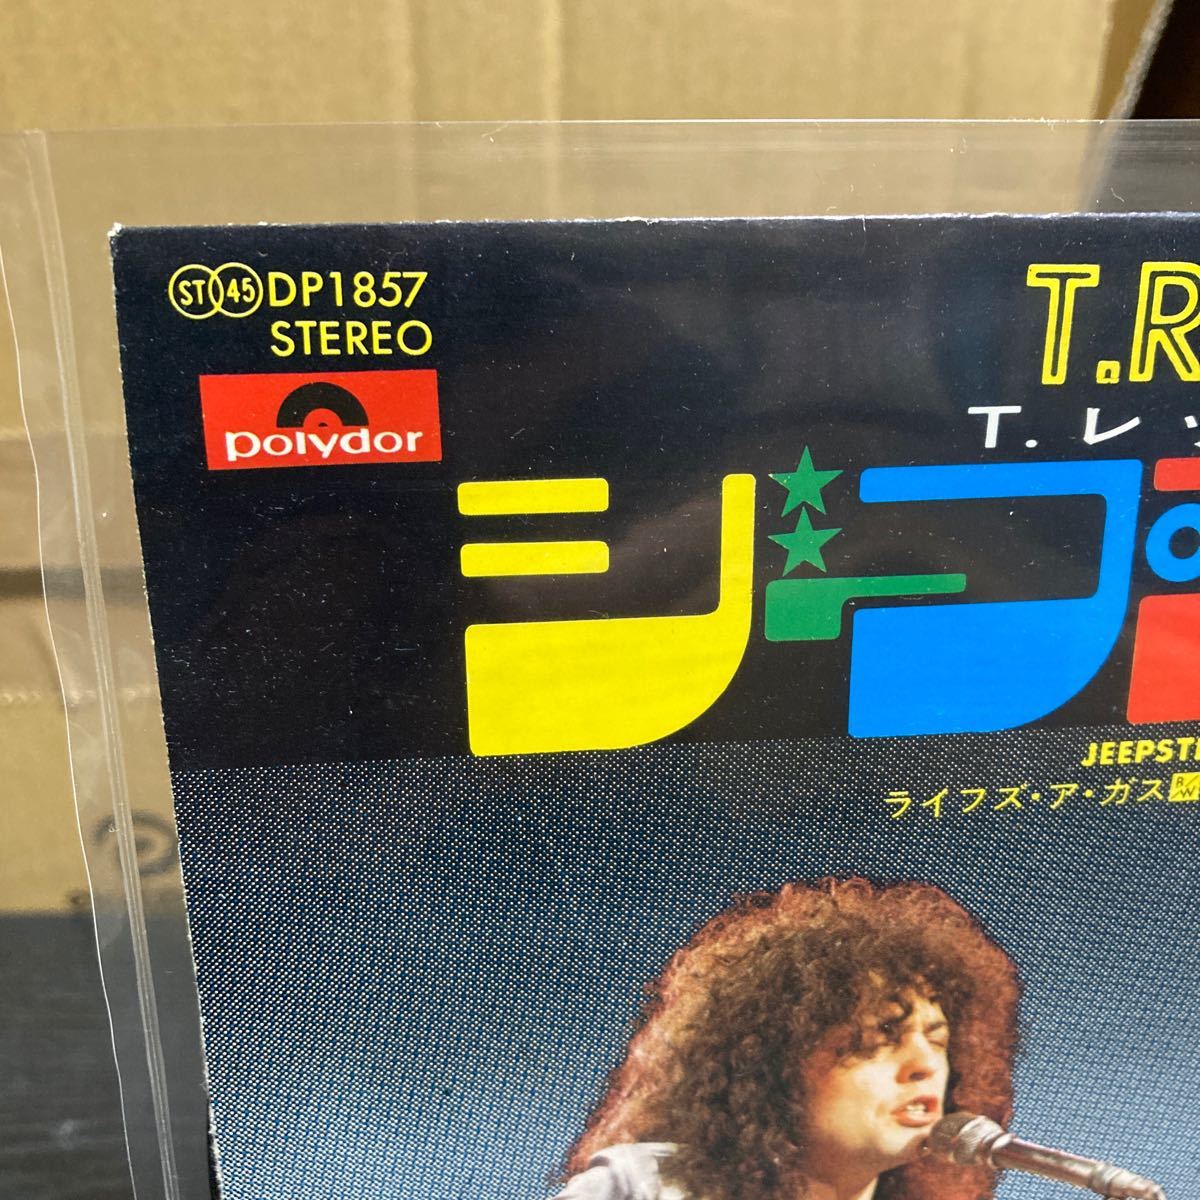 T. Rex 【ジープスター Jeepster】Polydor DP 1857 1972 Glam Rock_画像2